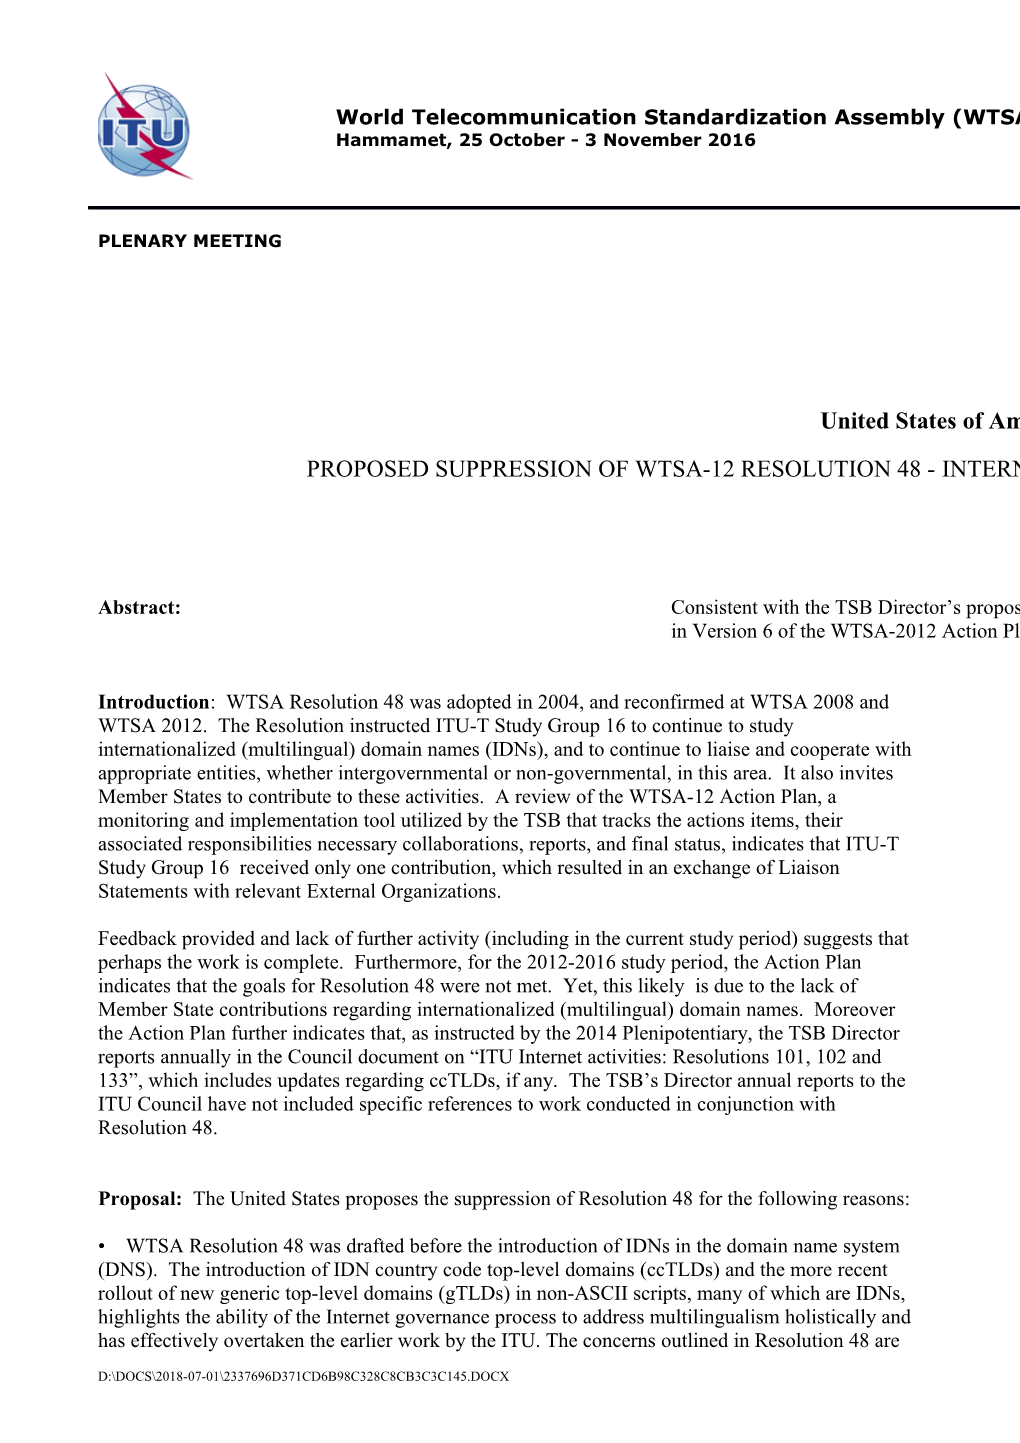 Introduction: WTSA Resolution 48 Was Adopted in 2004, and Reconfirmed at WTSA 2008 And